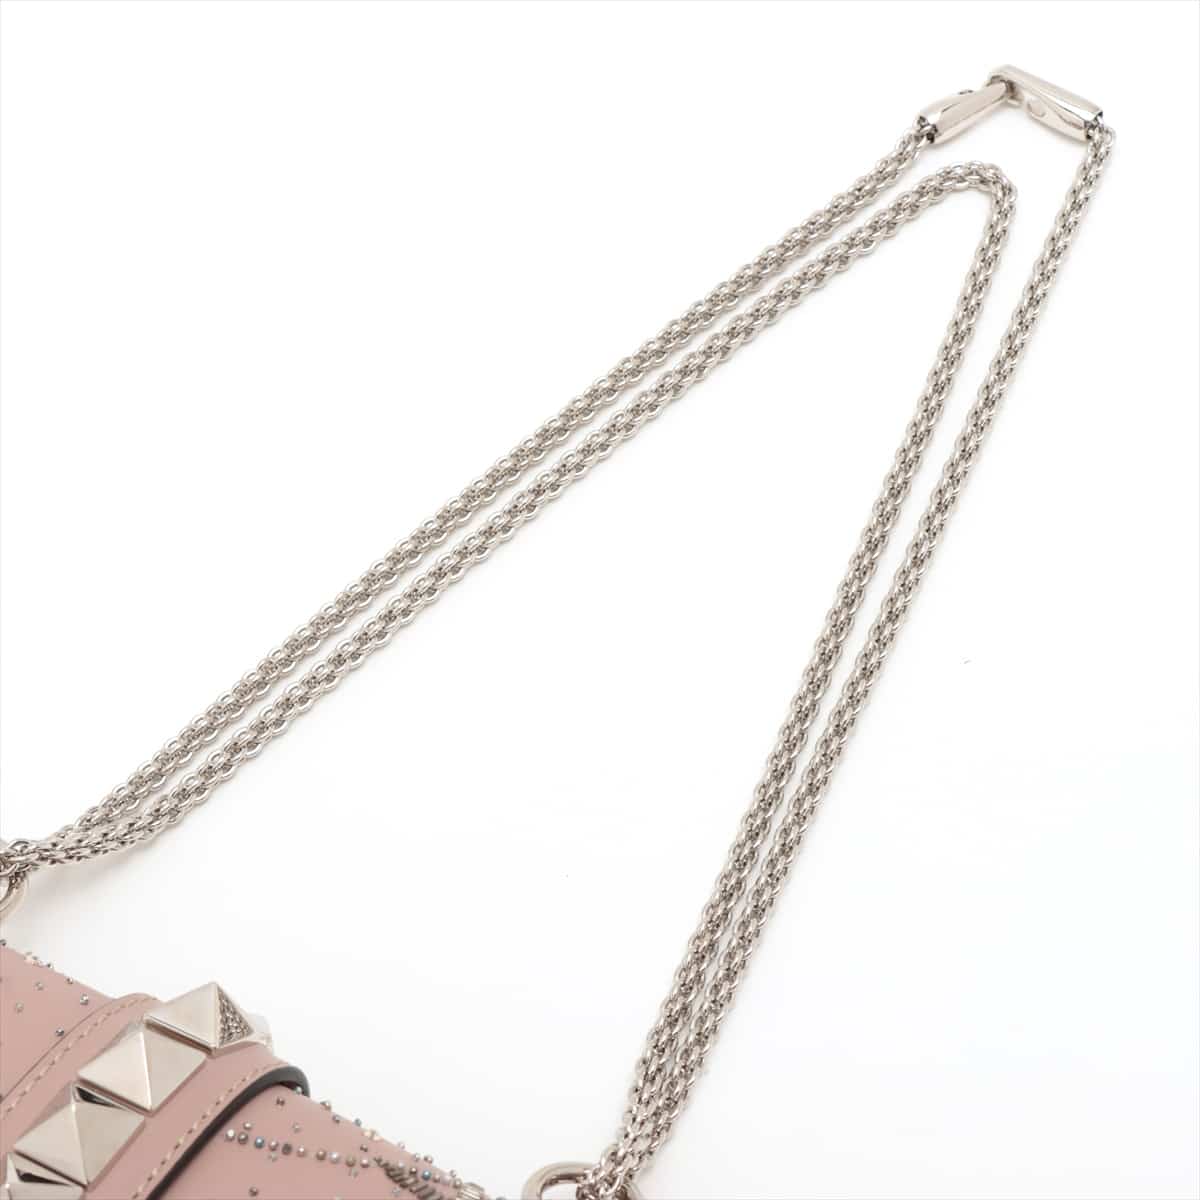 Valentino Garavani Leather x beads Chain shoulder bag Pink beige Surface beads can be removed